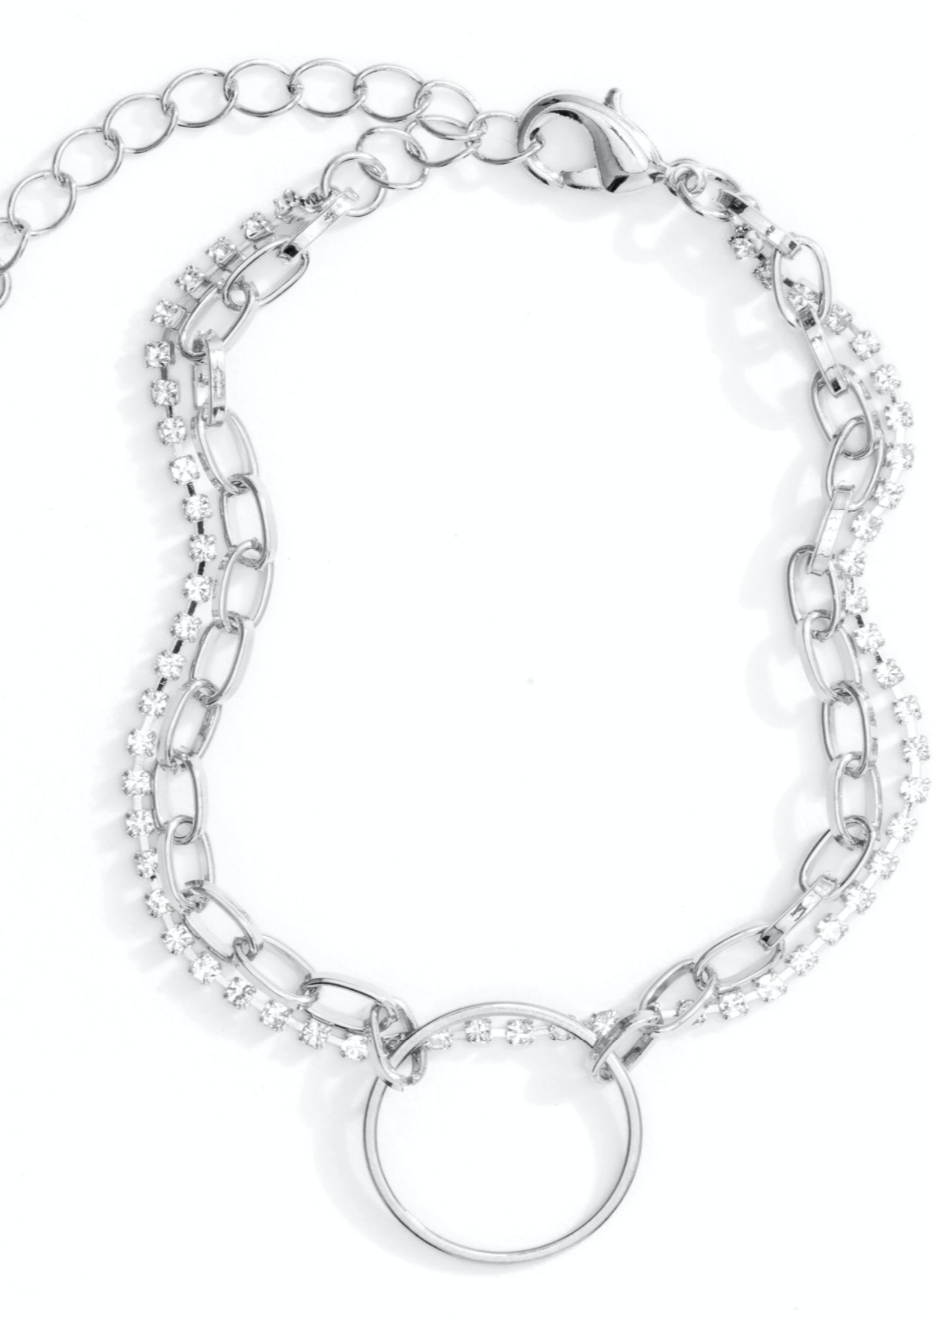 Delicate Circle and Chain Bracelet